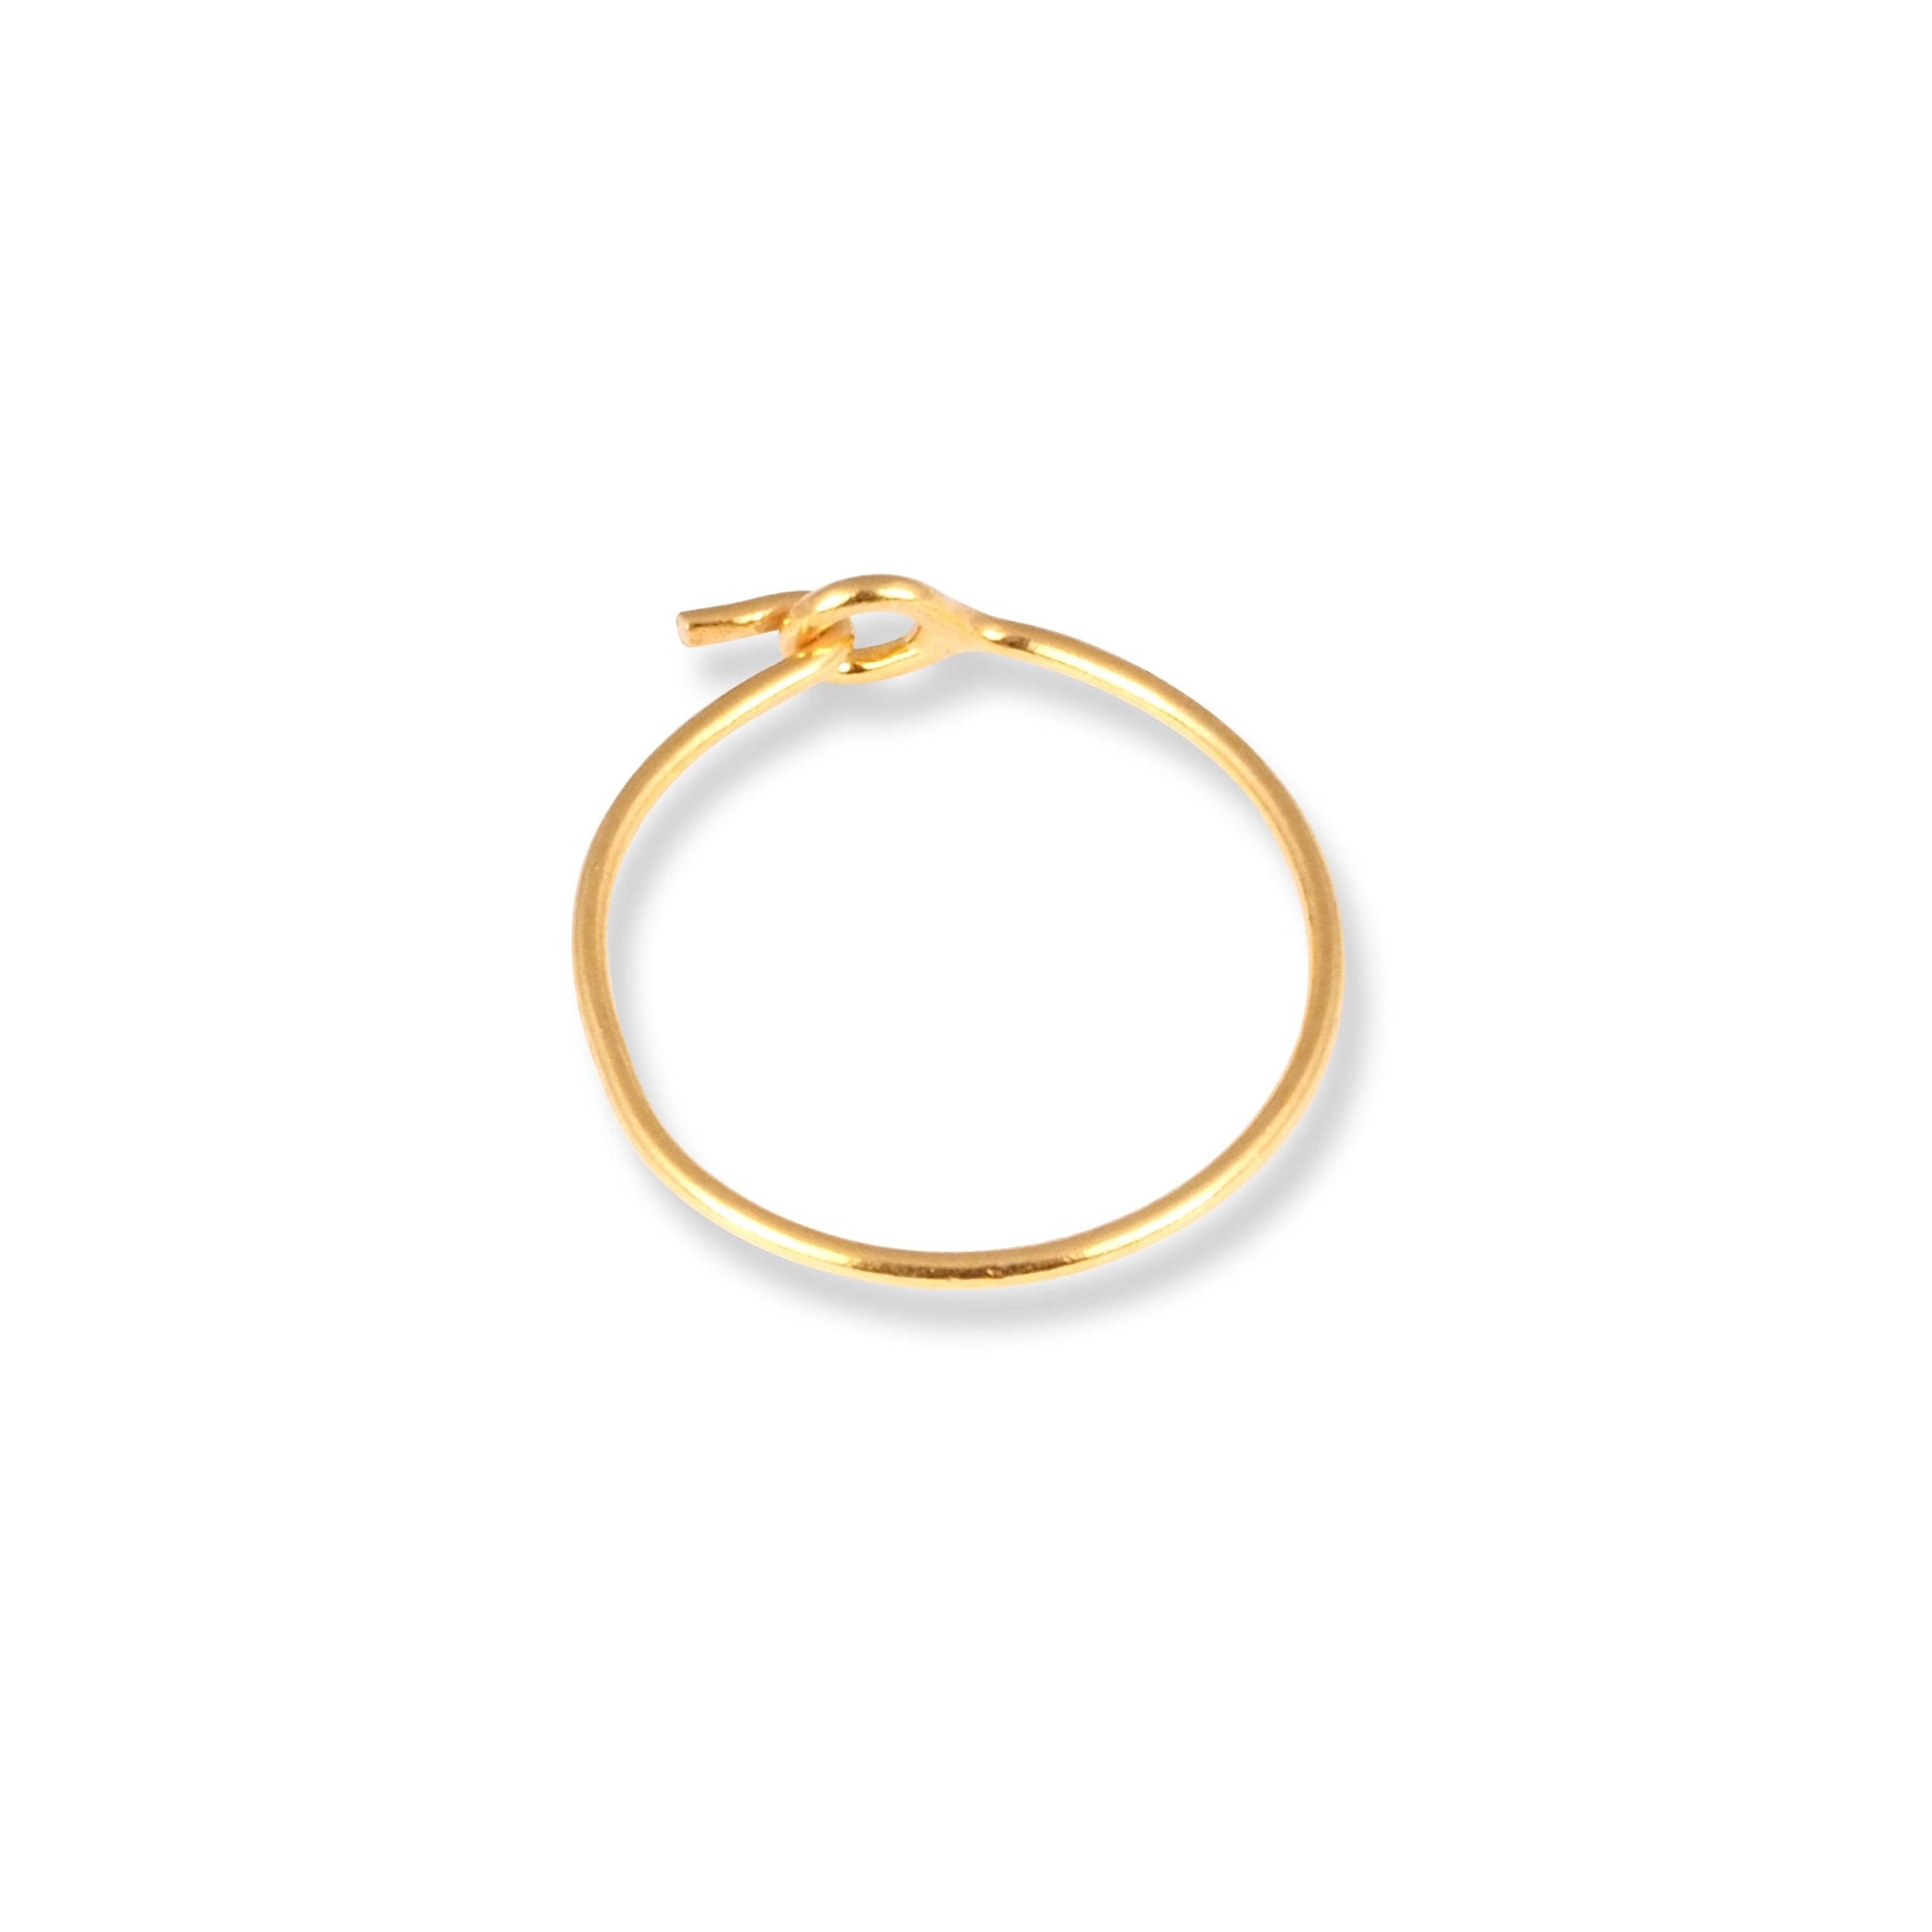 18ct Yellow Gold Knot Nose Ring NR-7588 - Minar Jewellers